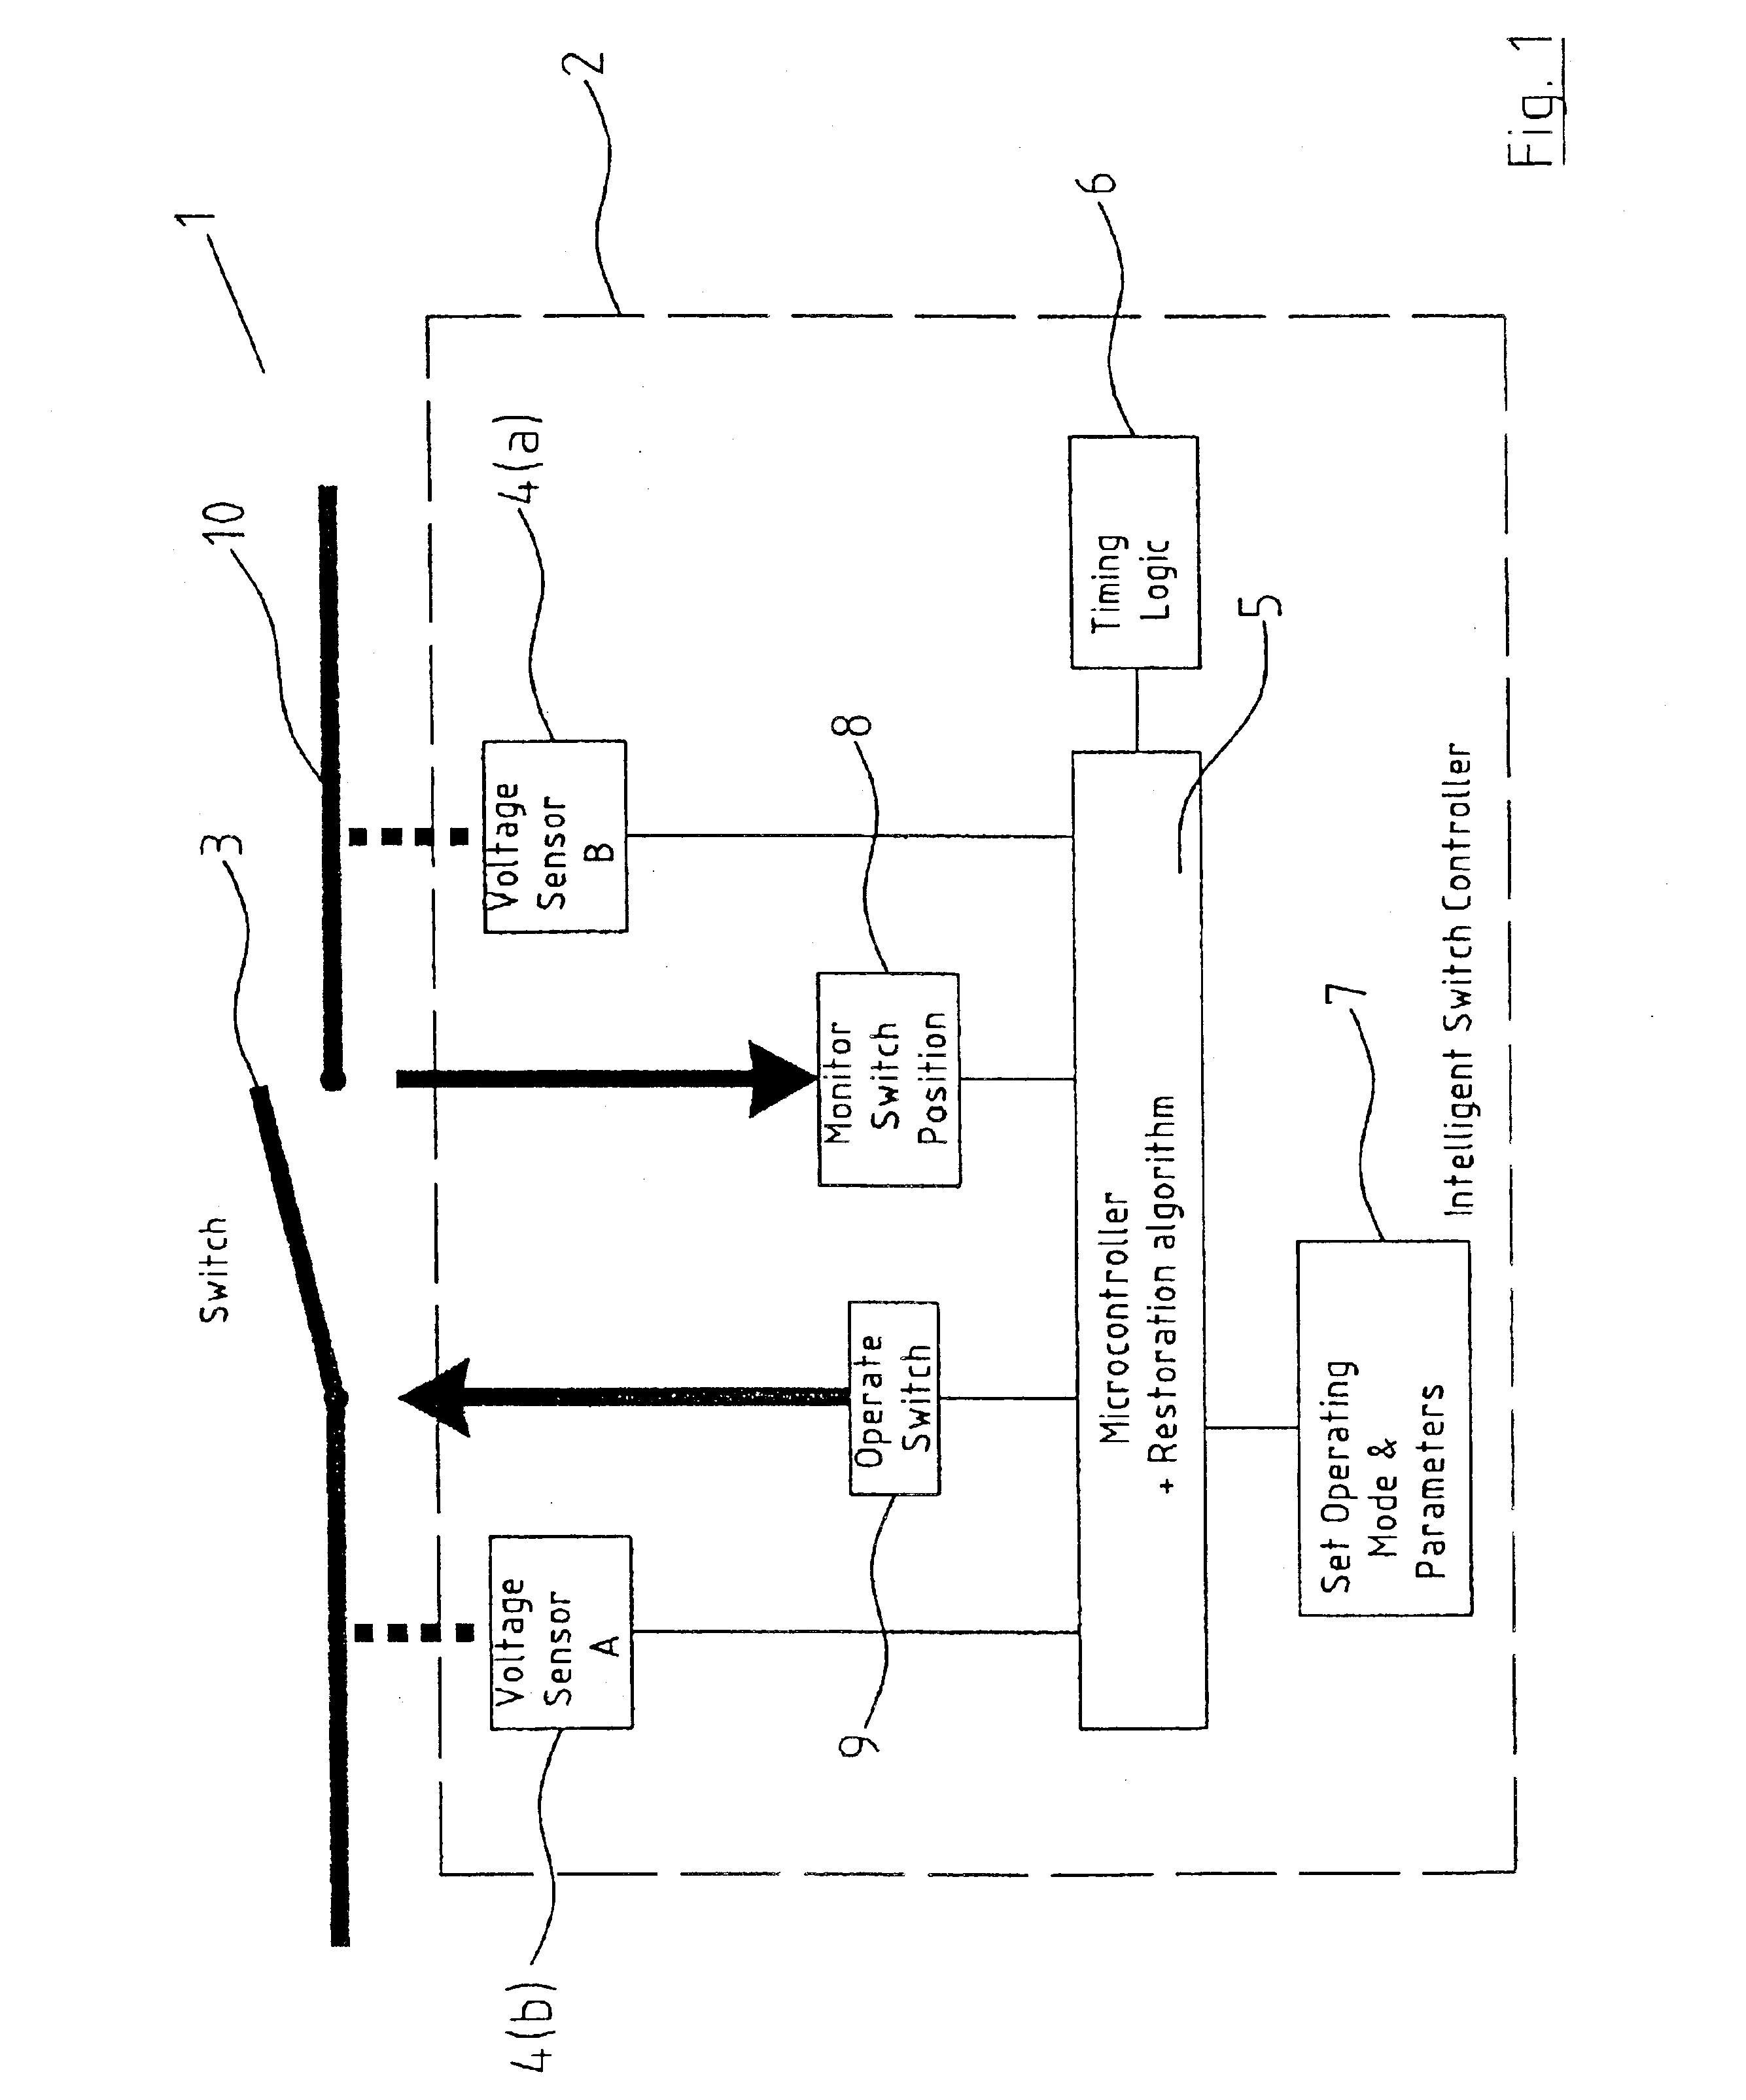 Fault control and restoration in a multi-feed power network